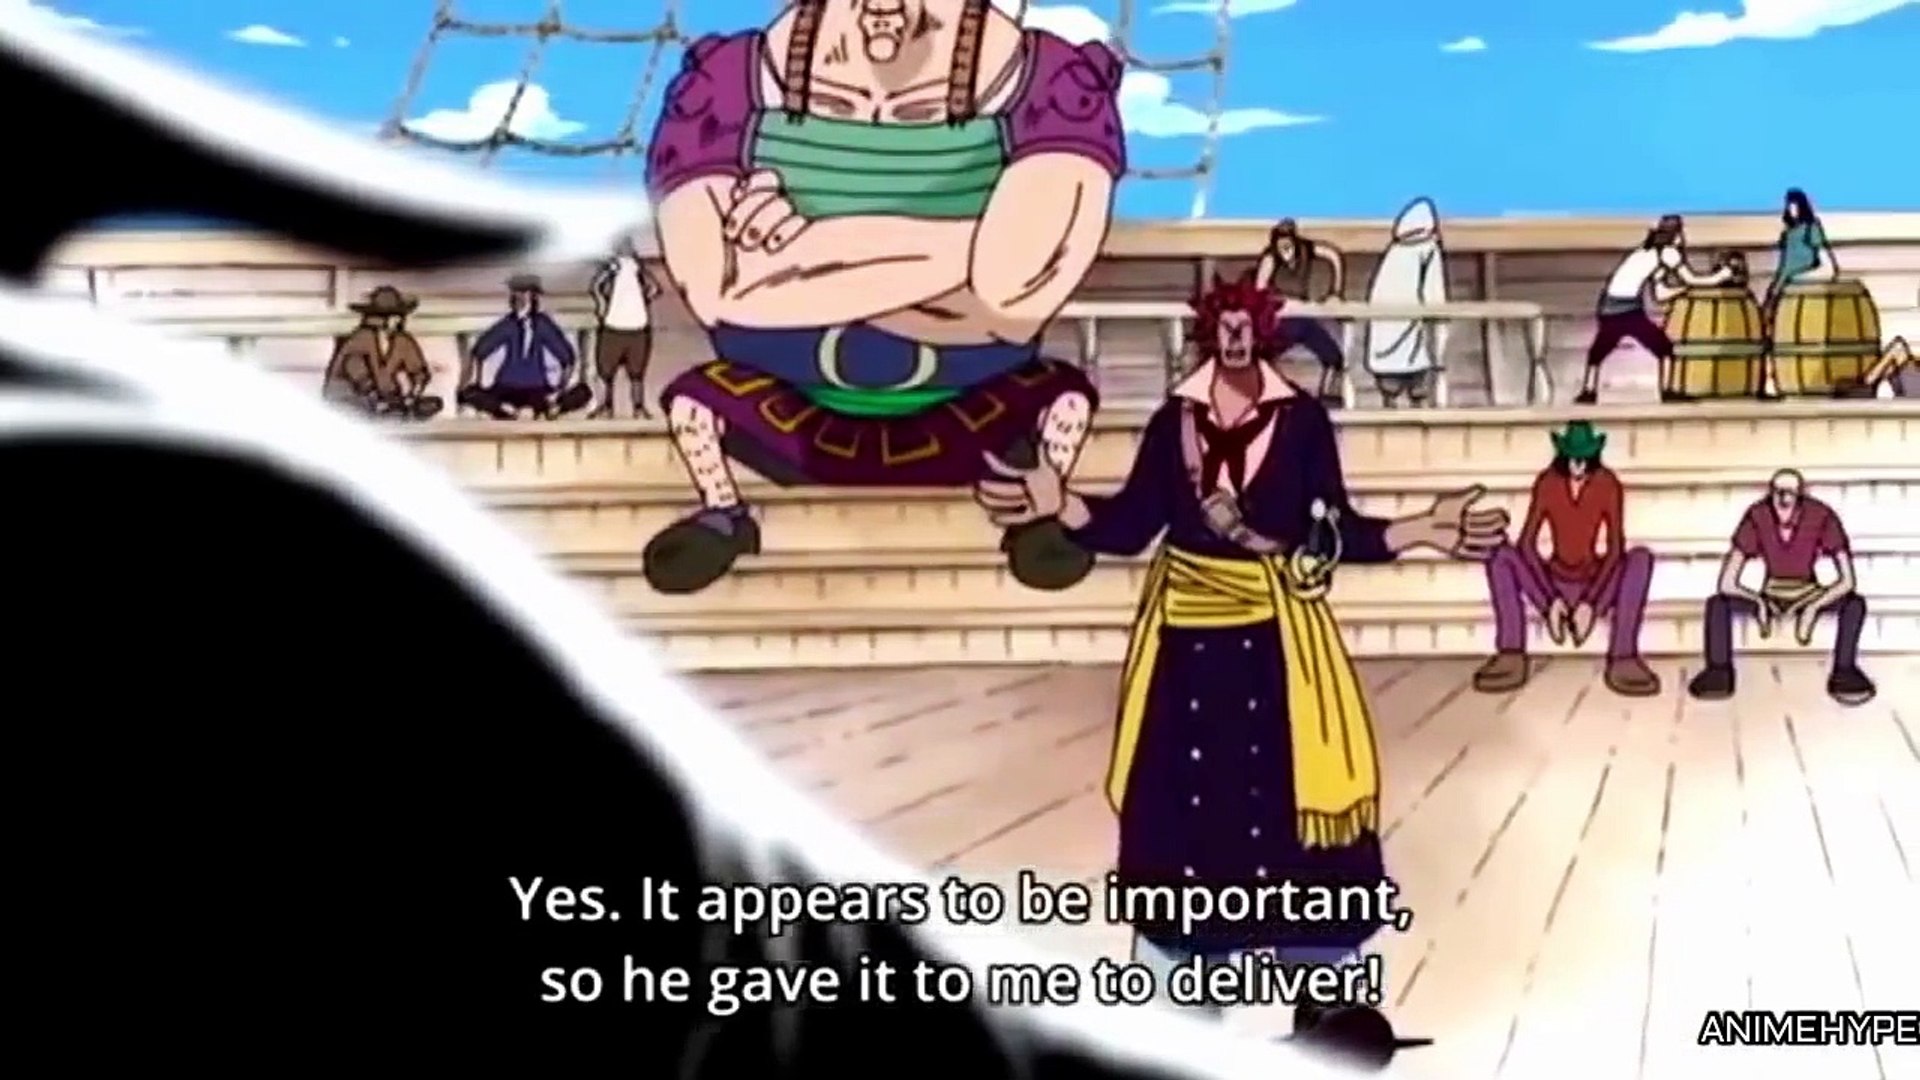 Shanks Asks Rockstar To Deliver An Important Letter One Piece 151 Eng Sub Hd فيديو Dailymotion